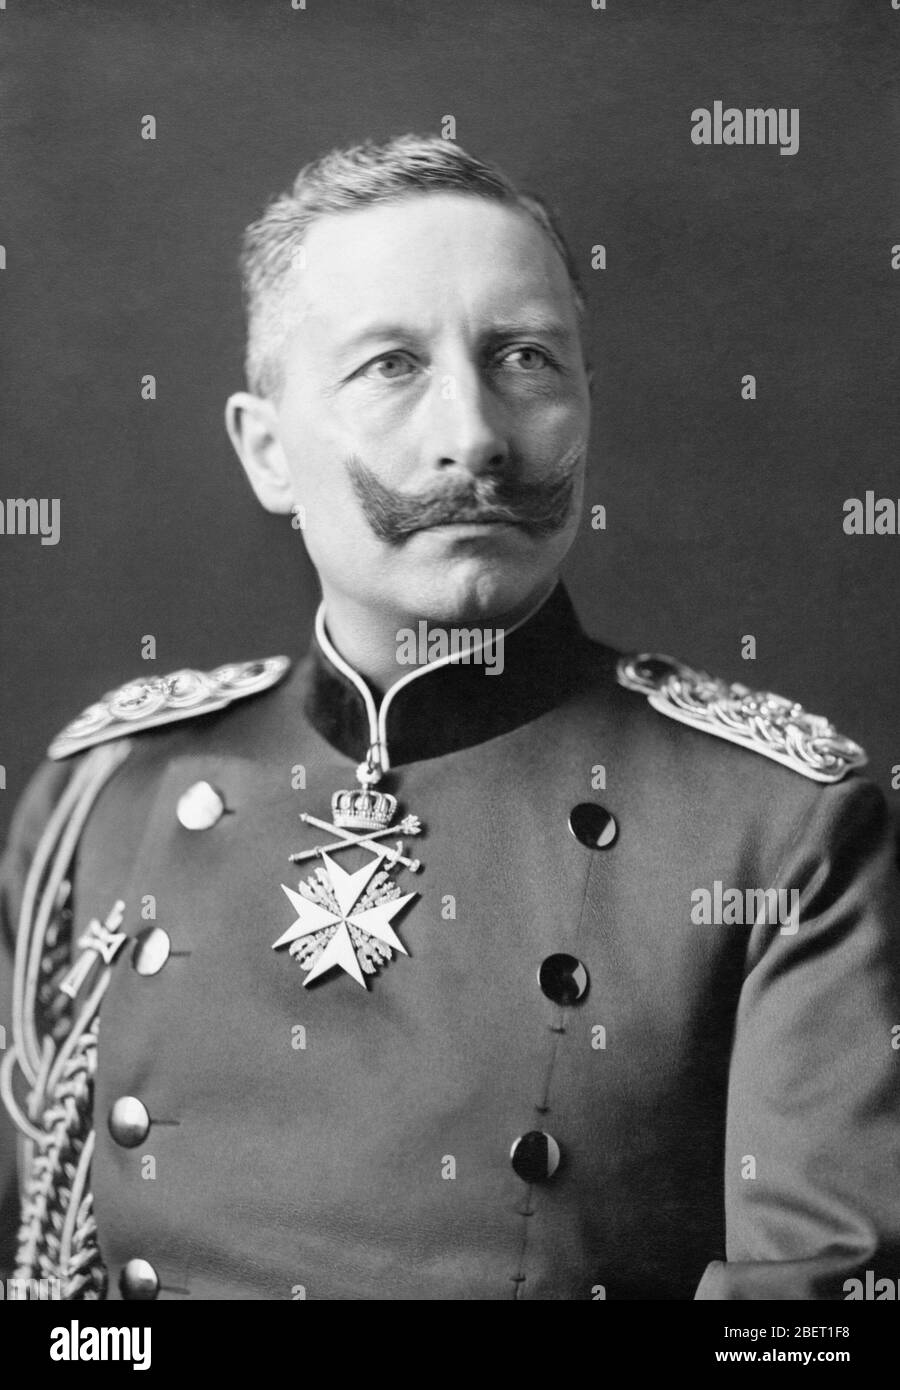 Portrait of Kaiser Wilhelm II, Emperor of Germany and King of Prussia, taken in 1902. Stock Photo